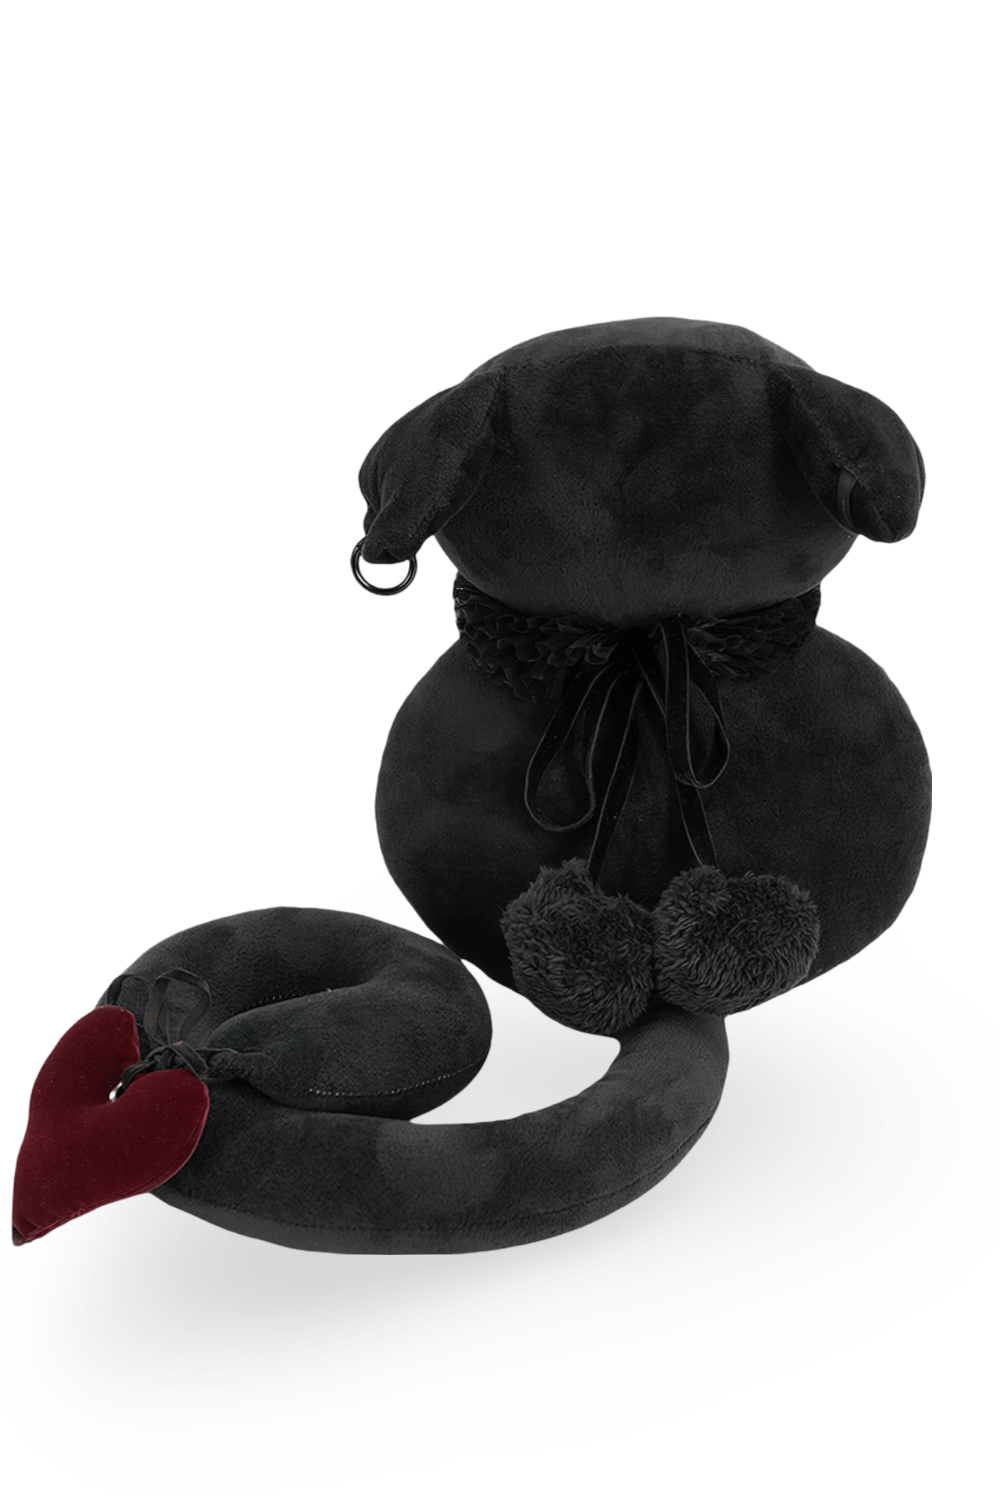 Mystic Faceless Cat Toy With Detachable Hearts And Collar